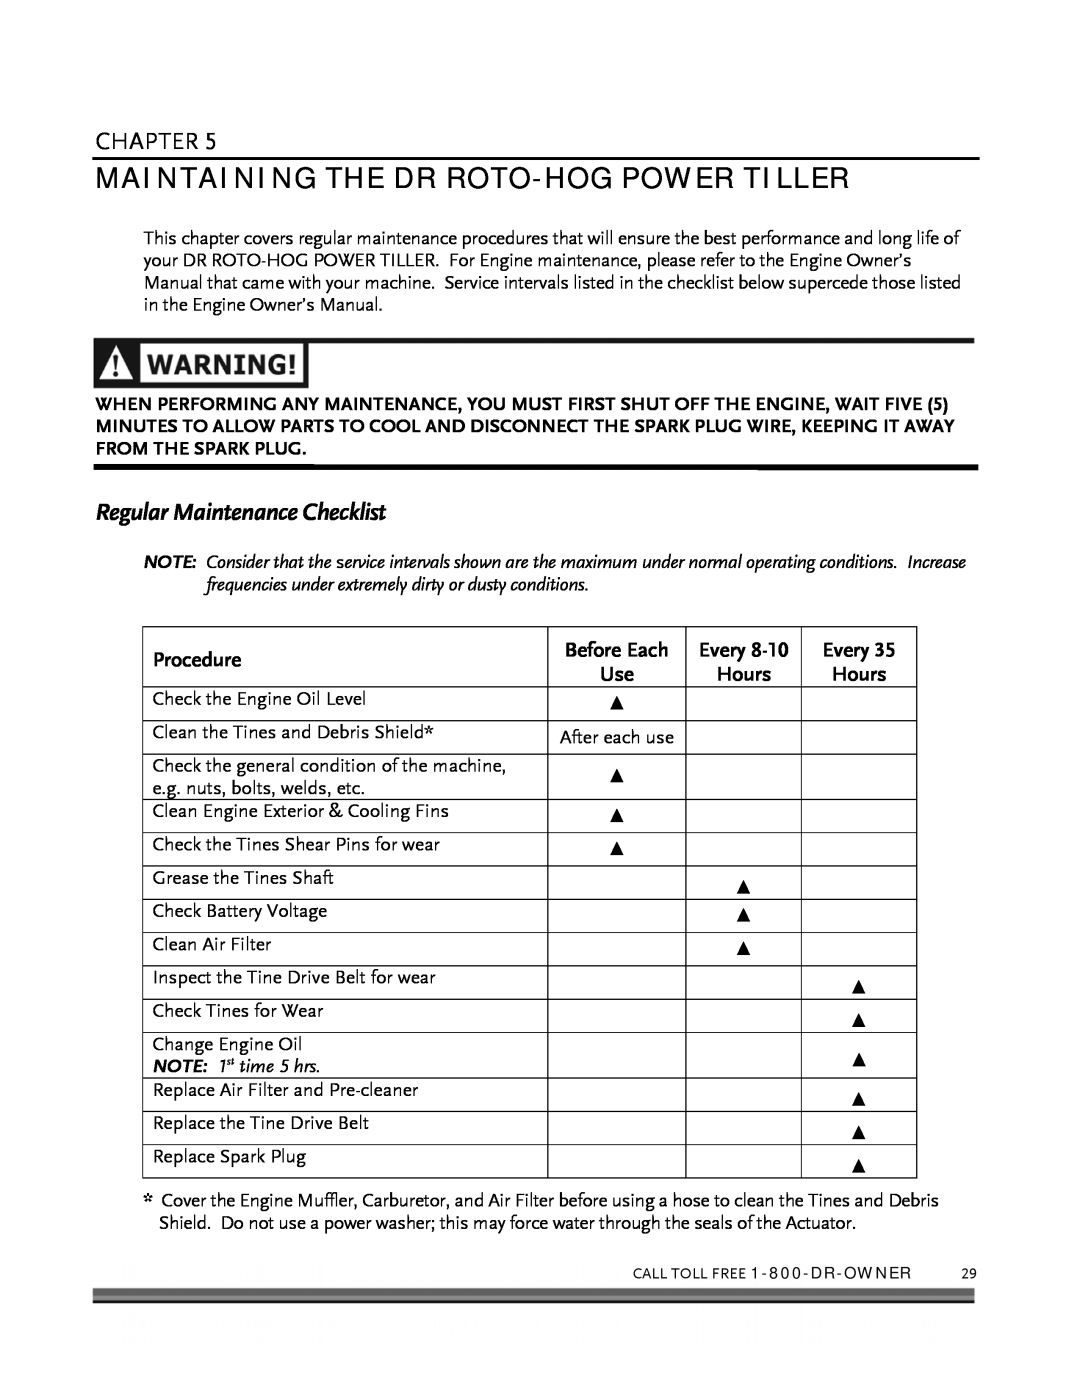 Country Home Products ROTO-HOGTM Maintaining The Dr Roto-Hogpower Tiller, Regular Maintenance Checklist, Chapter, Every 